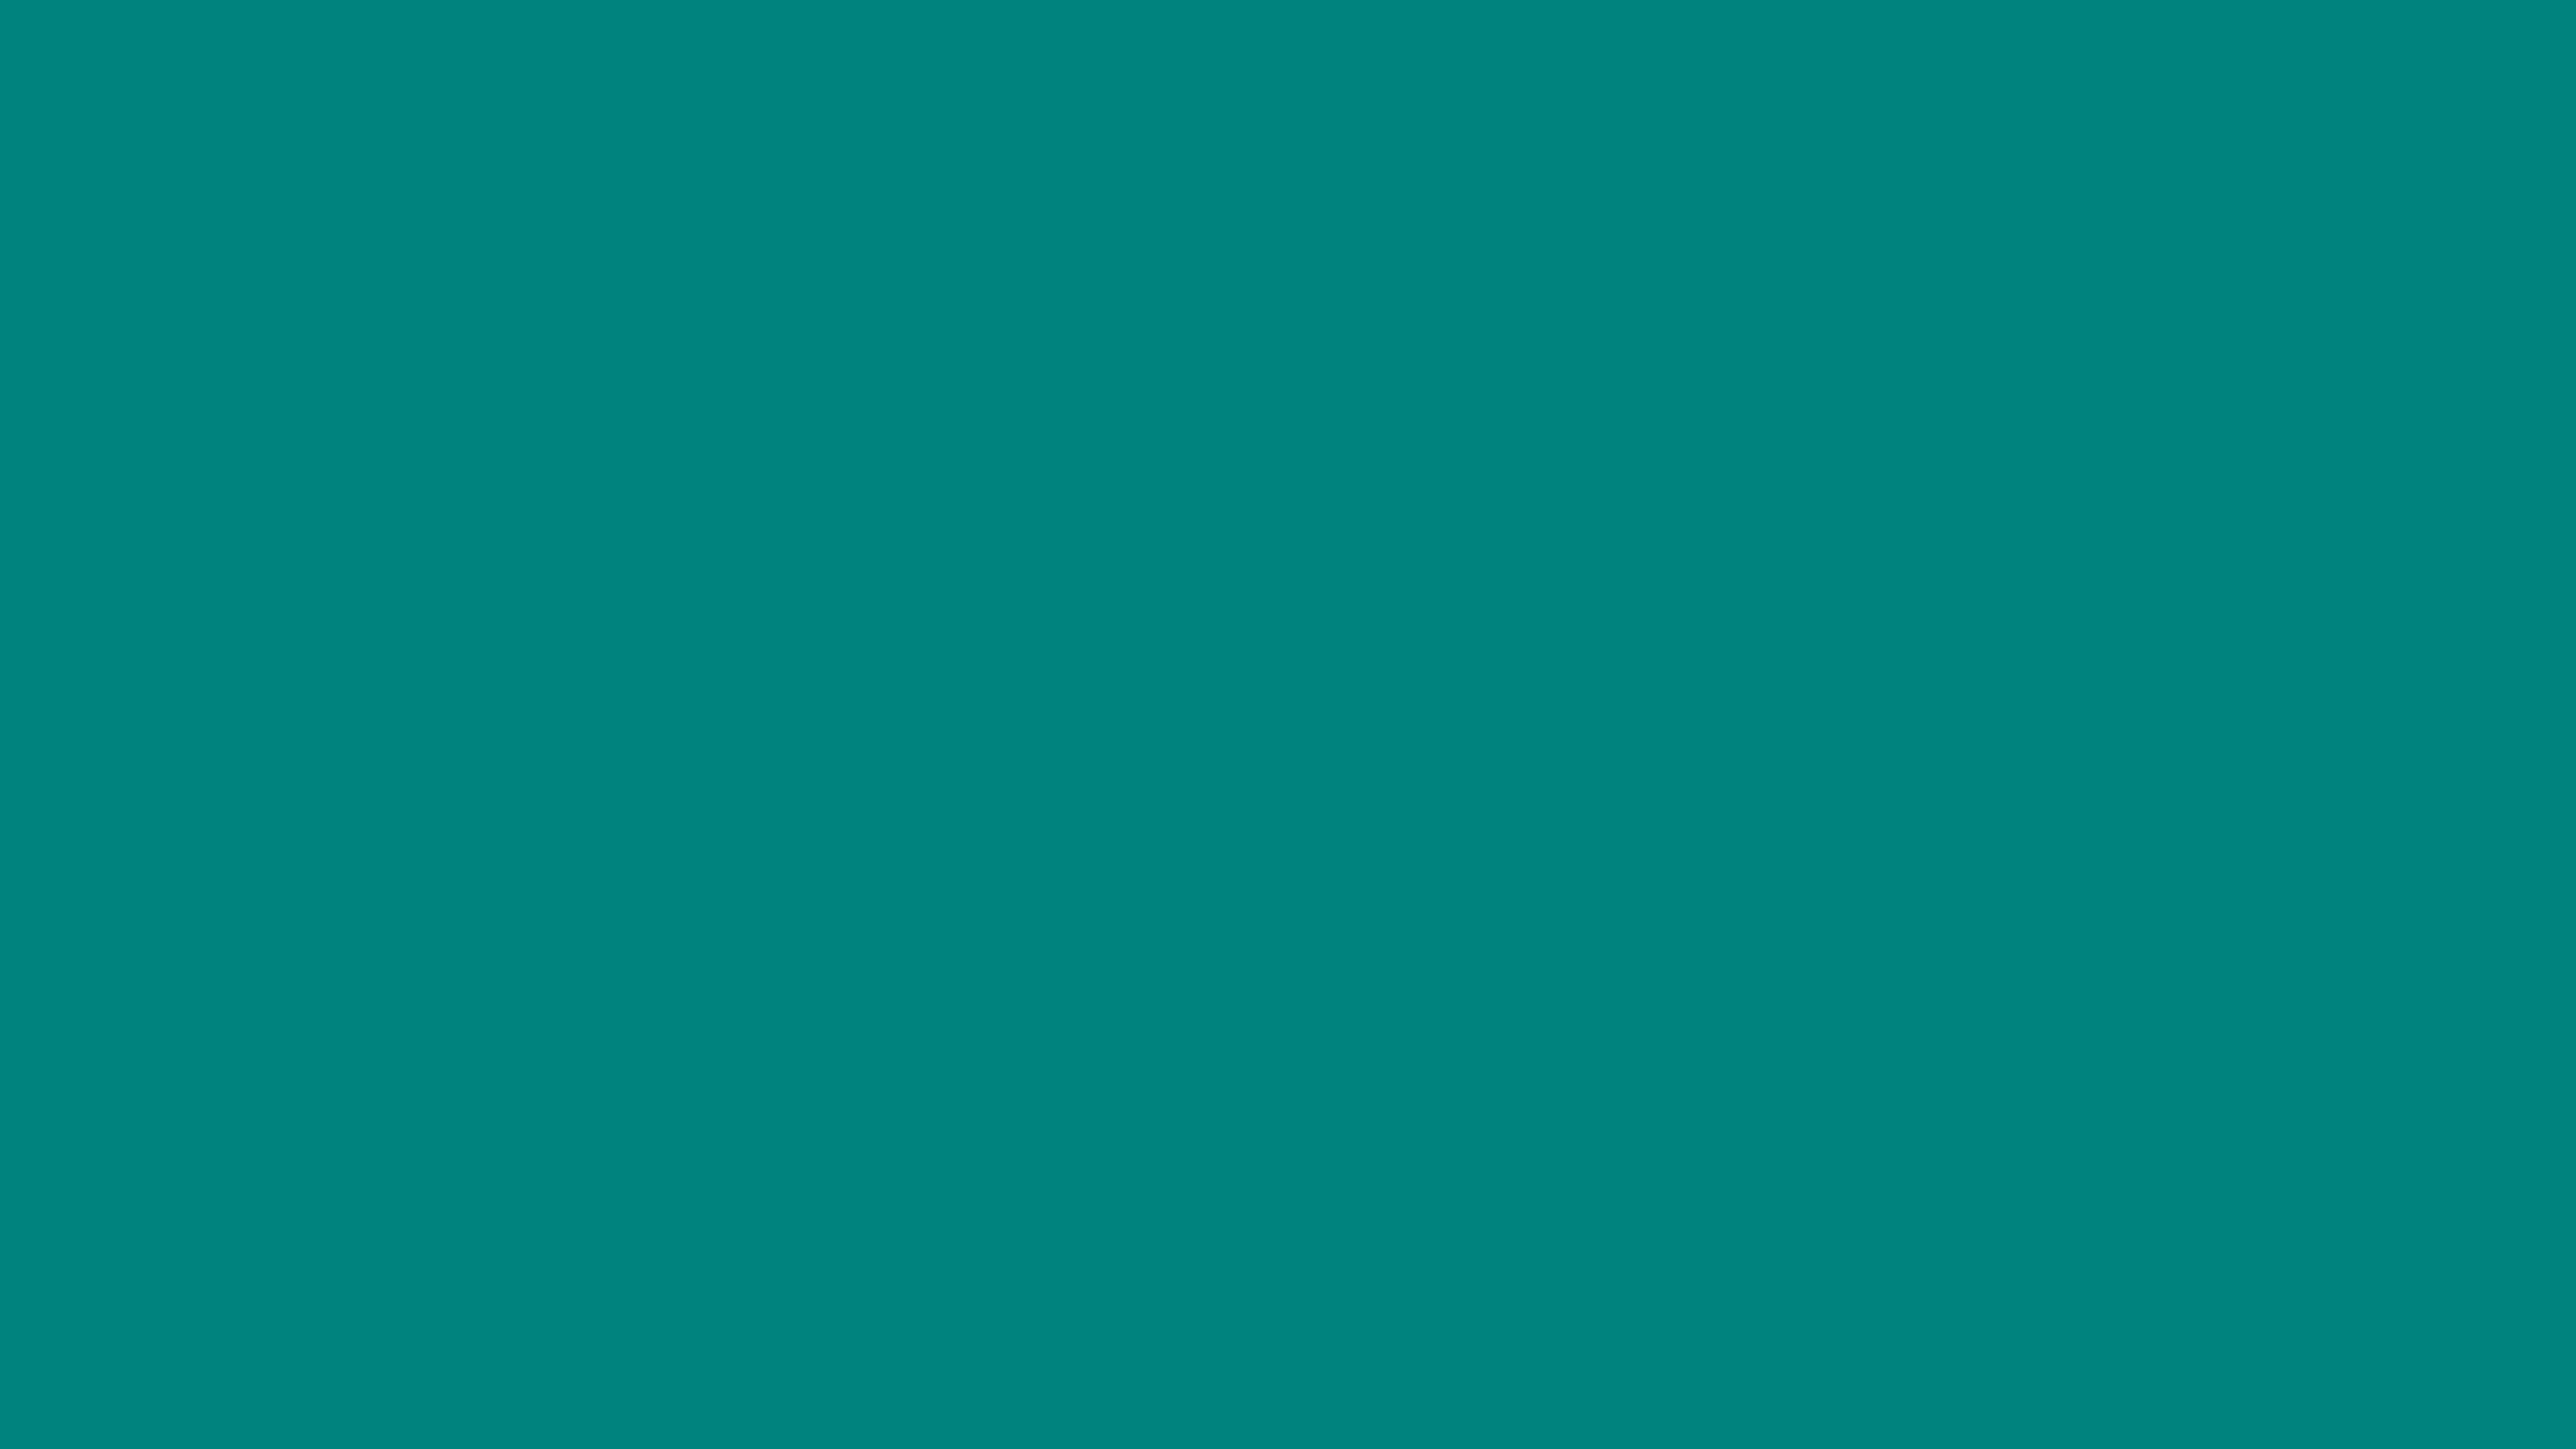 7680x4320 Teal Green Solid Color Background